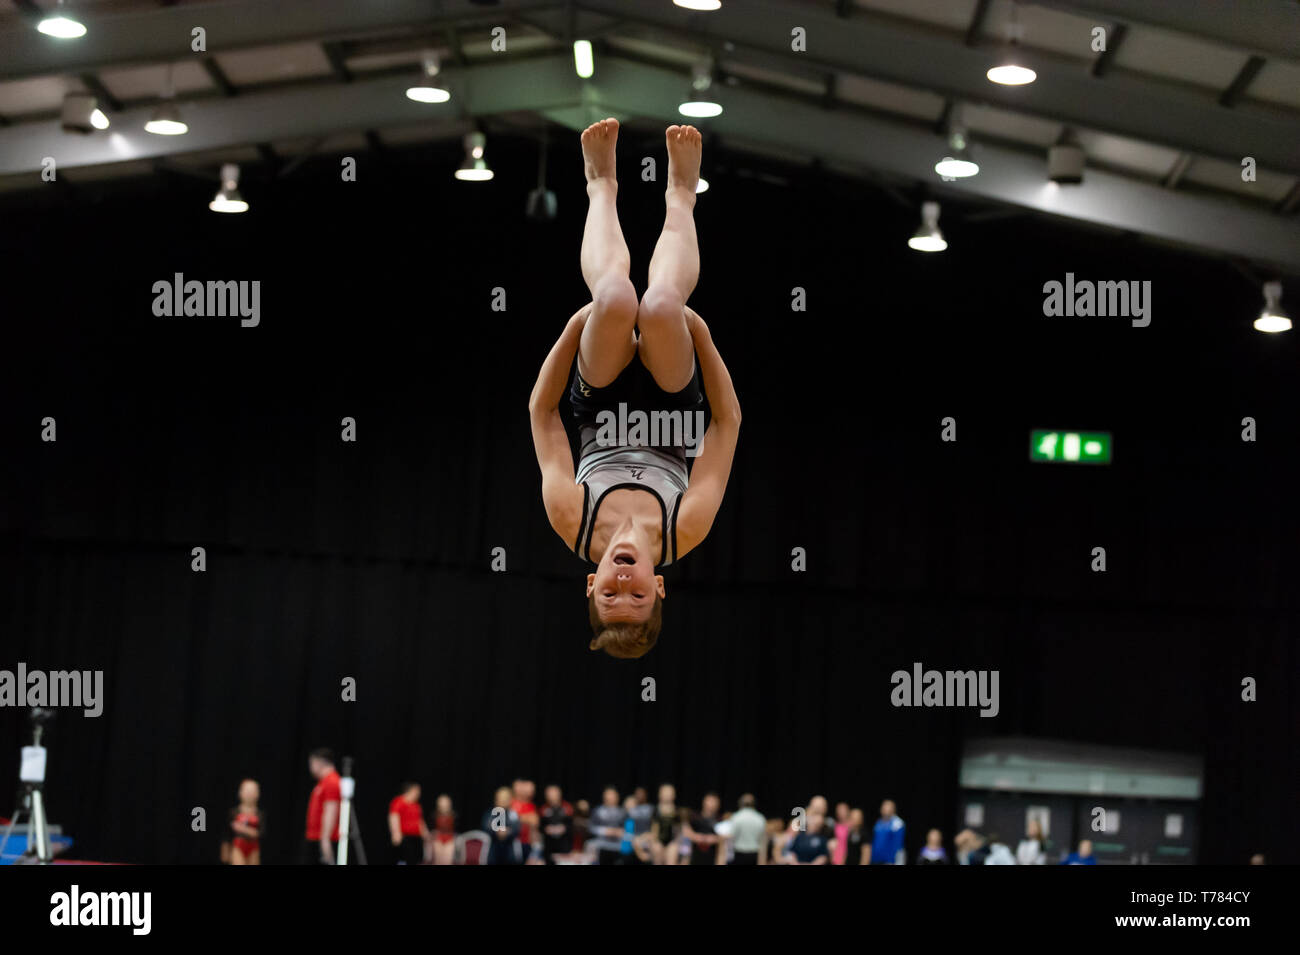 Telford, England, UK. 27 April, 2018. A male gymnast from Wakefield Gymnastics Club in action during Spring Series 1 at the Telford International Centre, Telford, UK. Stock Photo